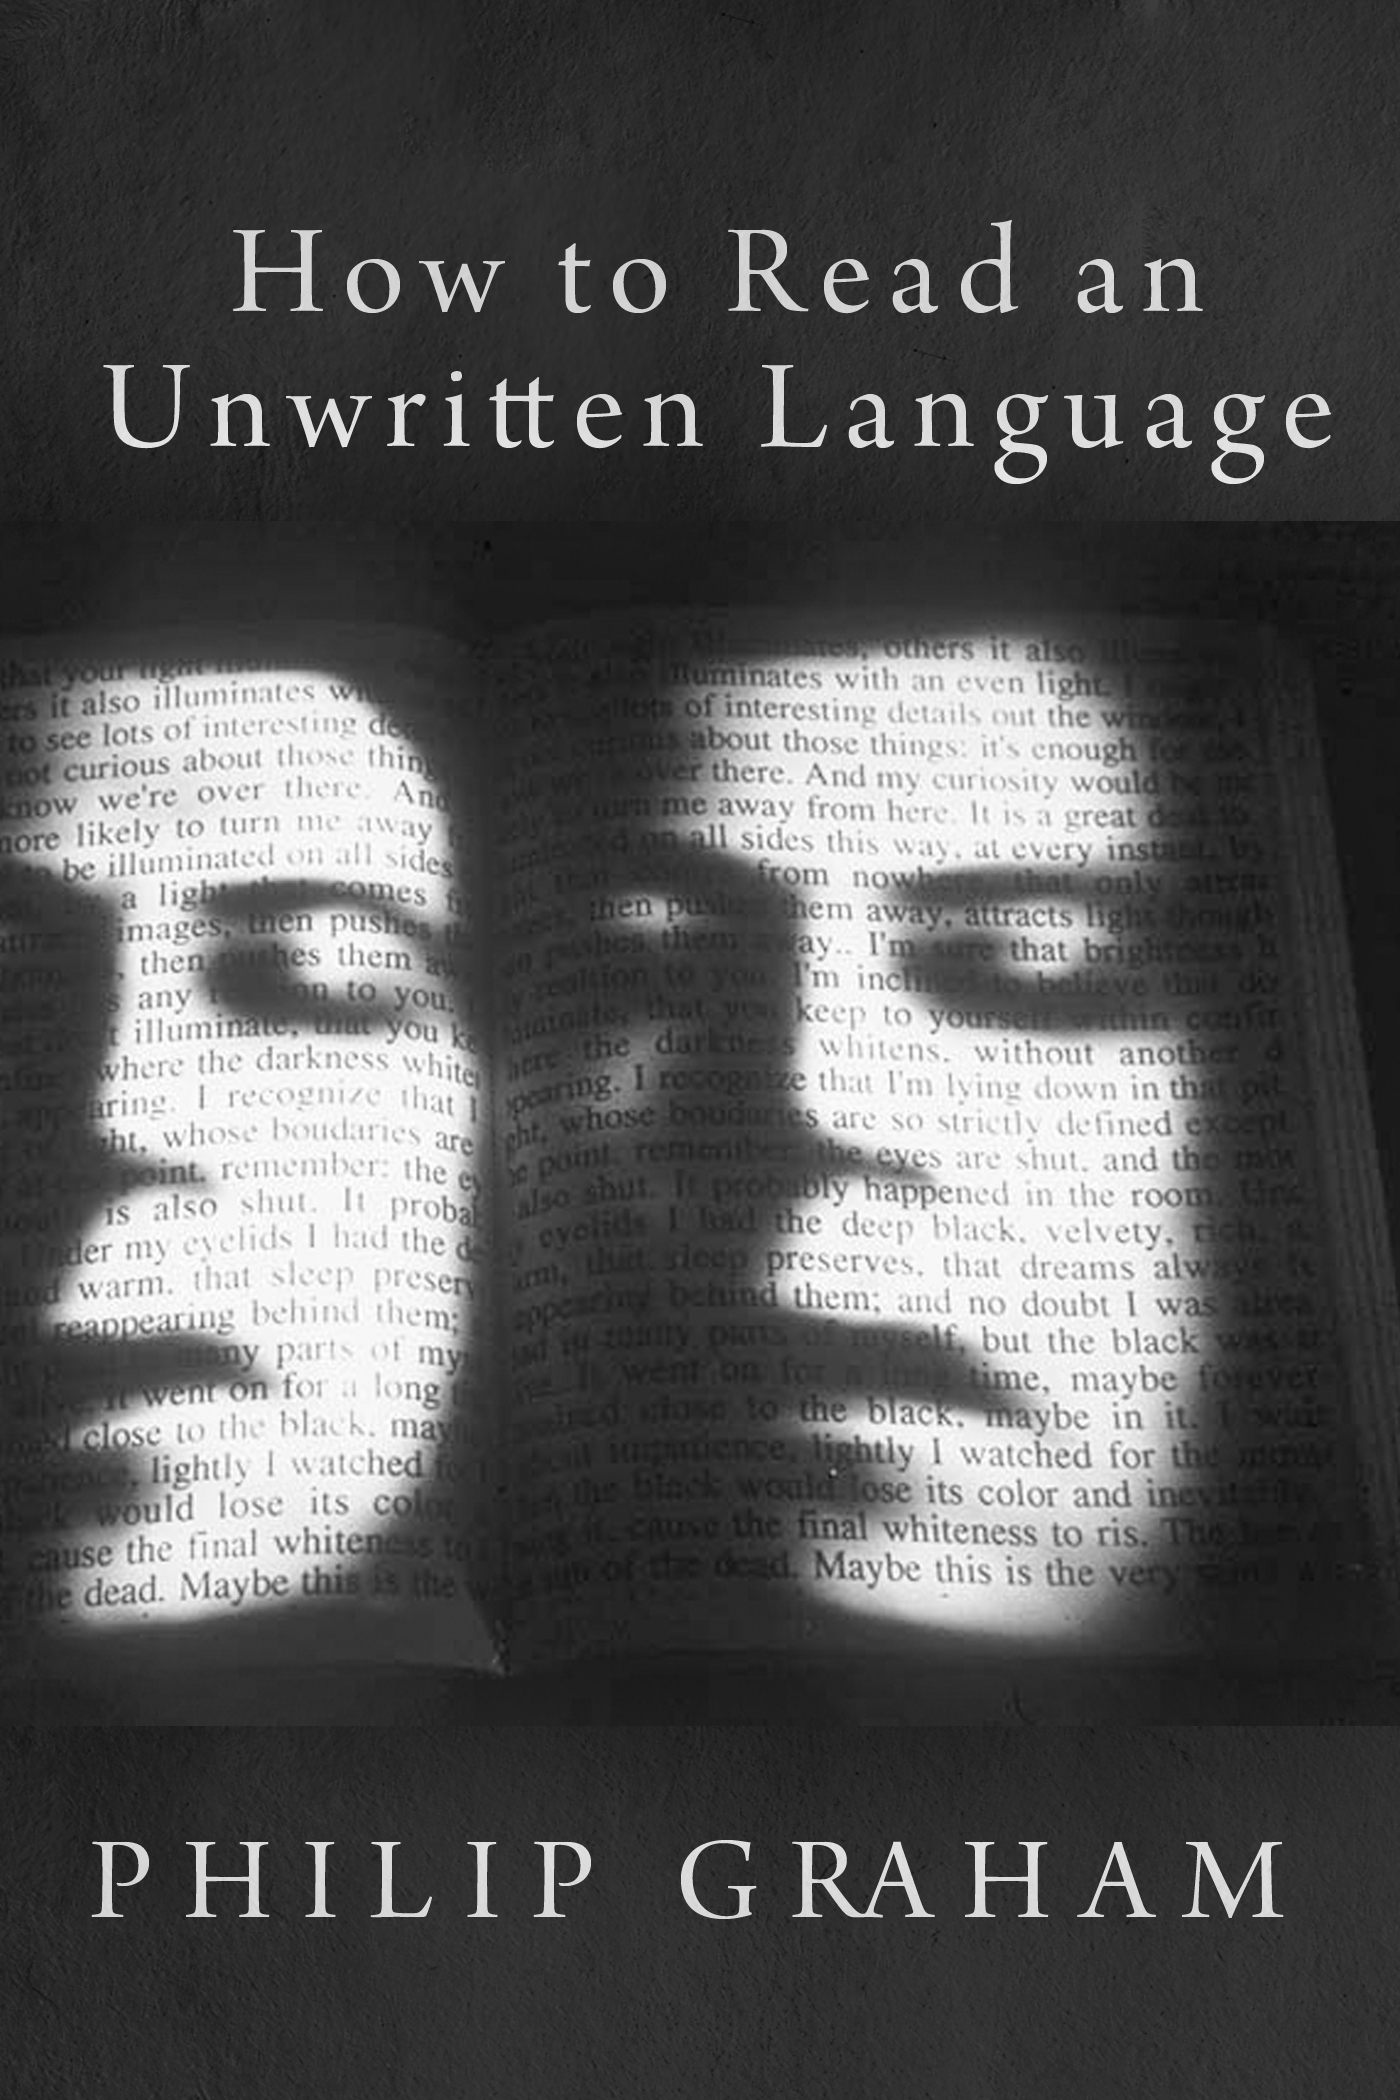 How to Read an Unwritten Language book cover